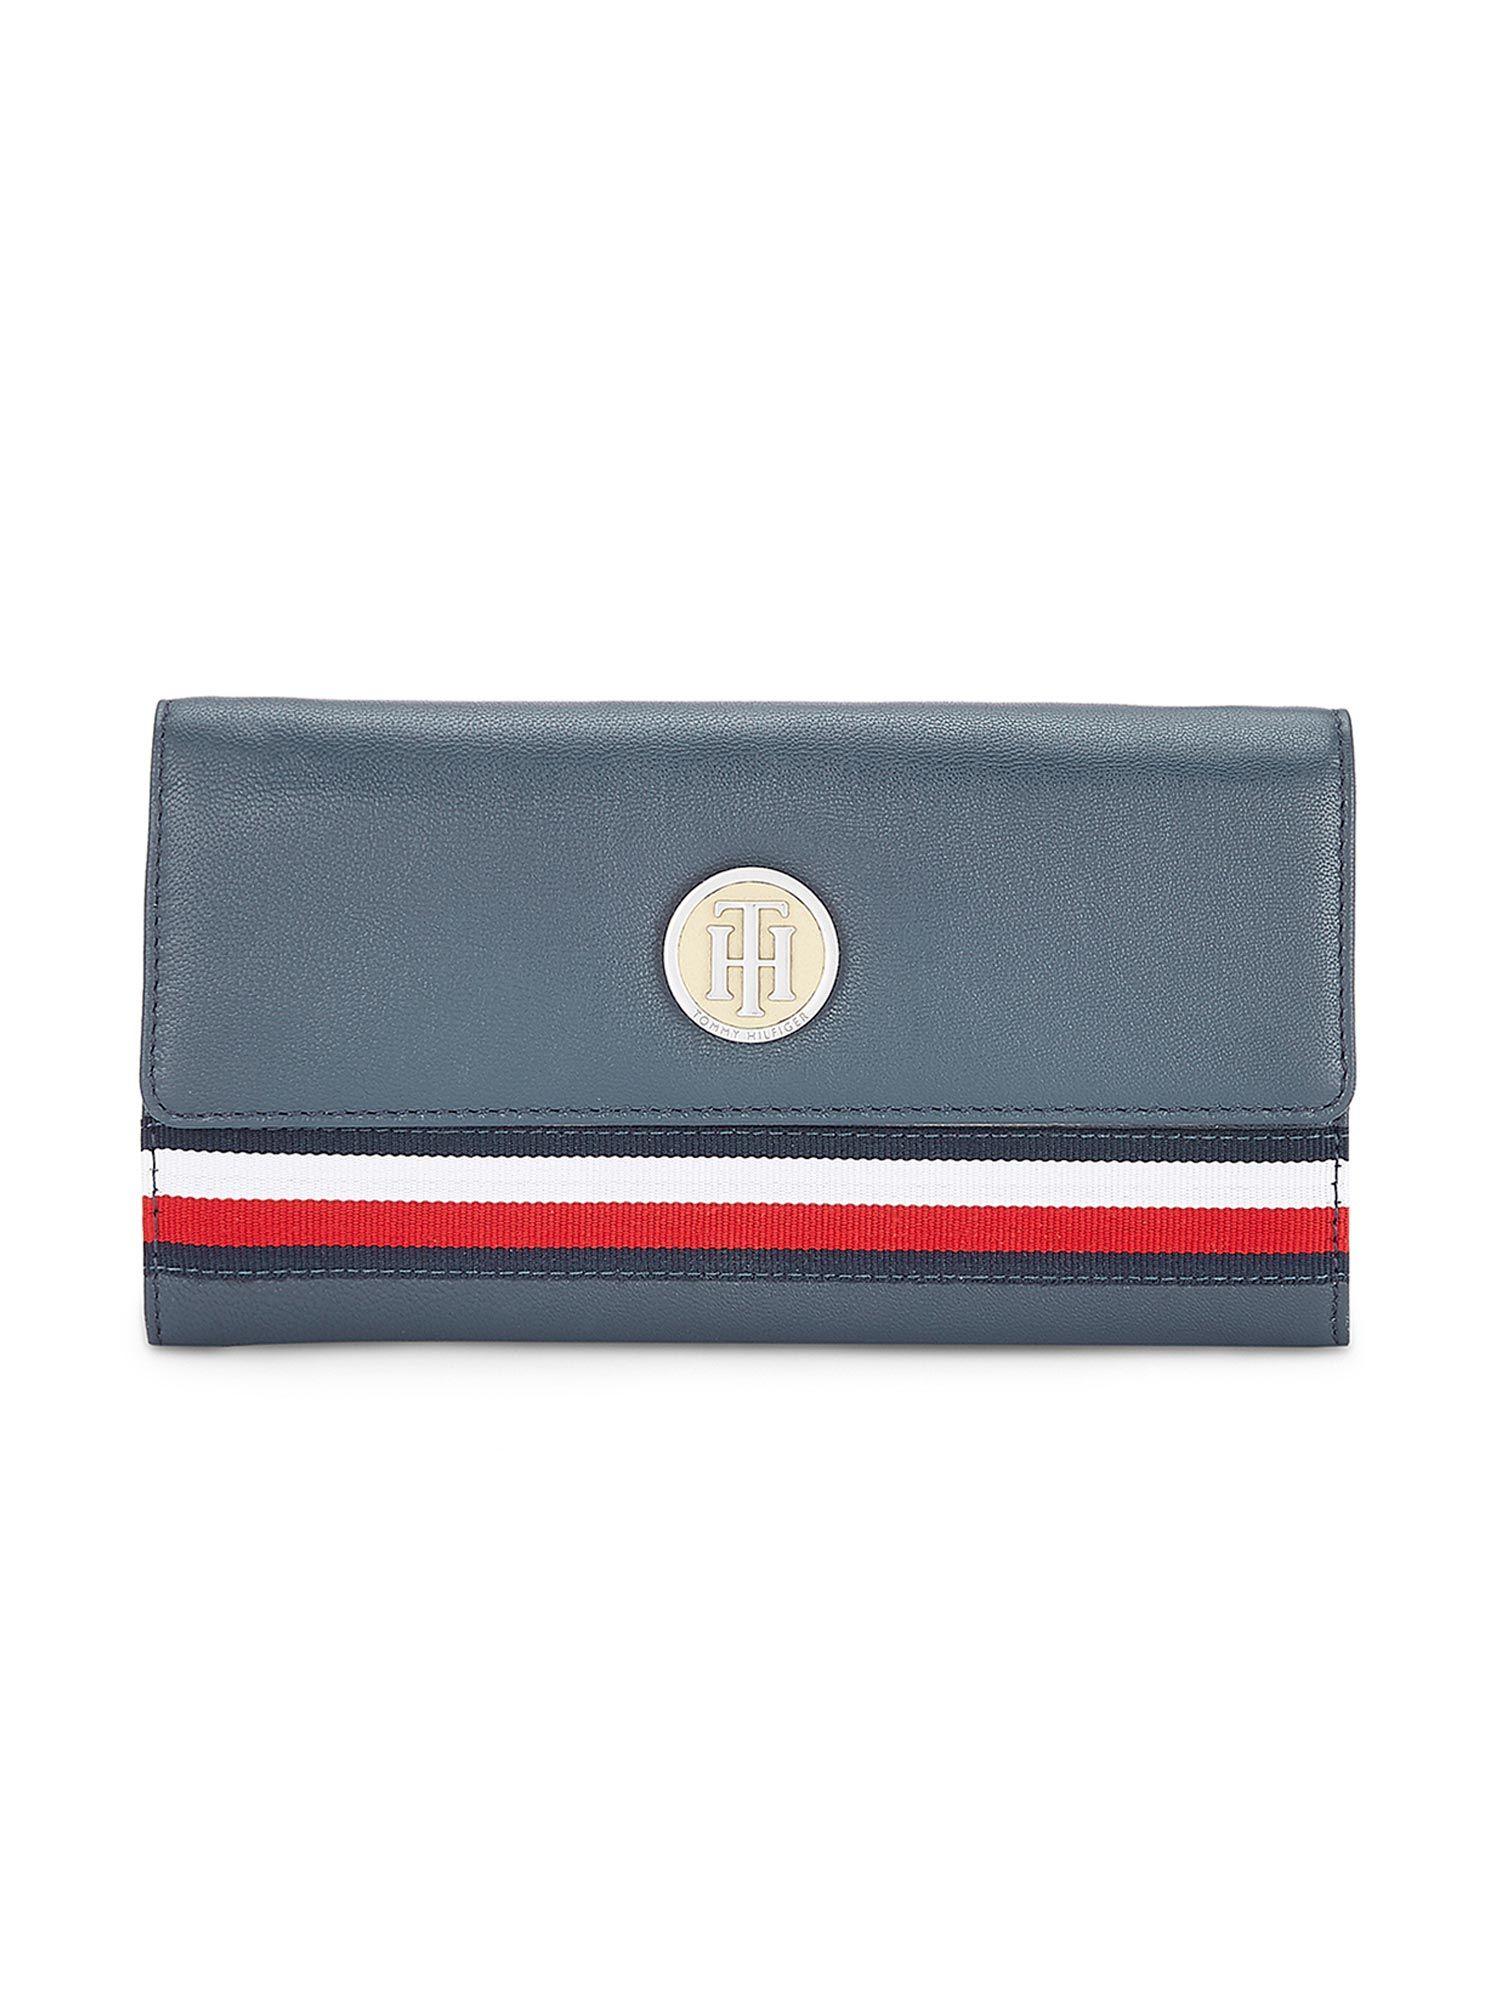 subdued wallet for women blue (8903496163230)